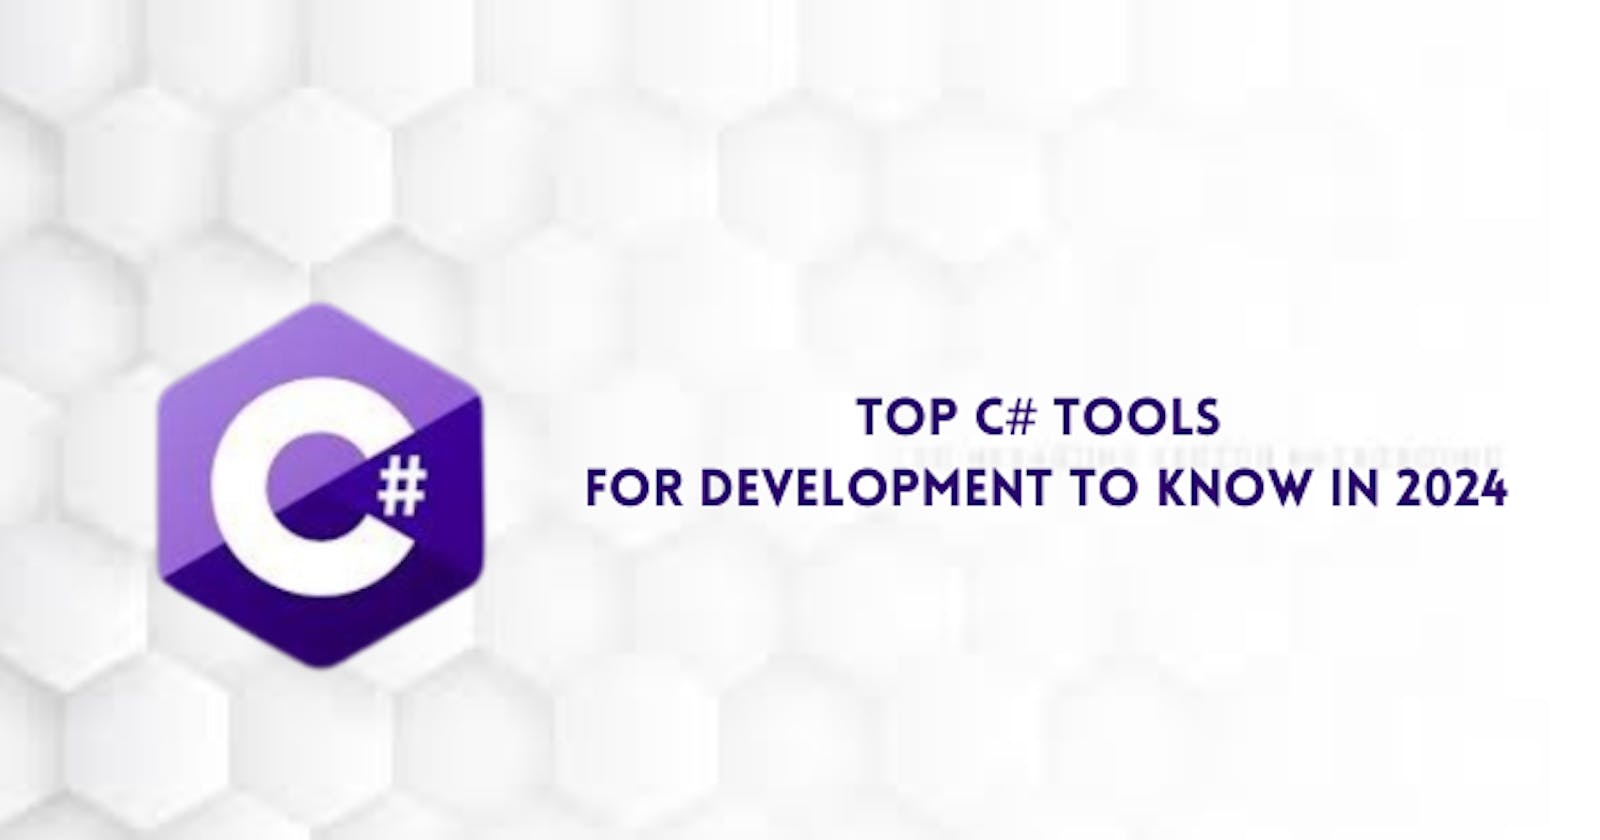 Top 8 tools for C# development in 2024